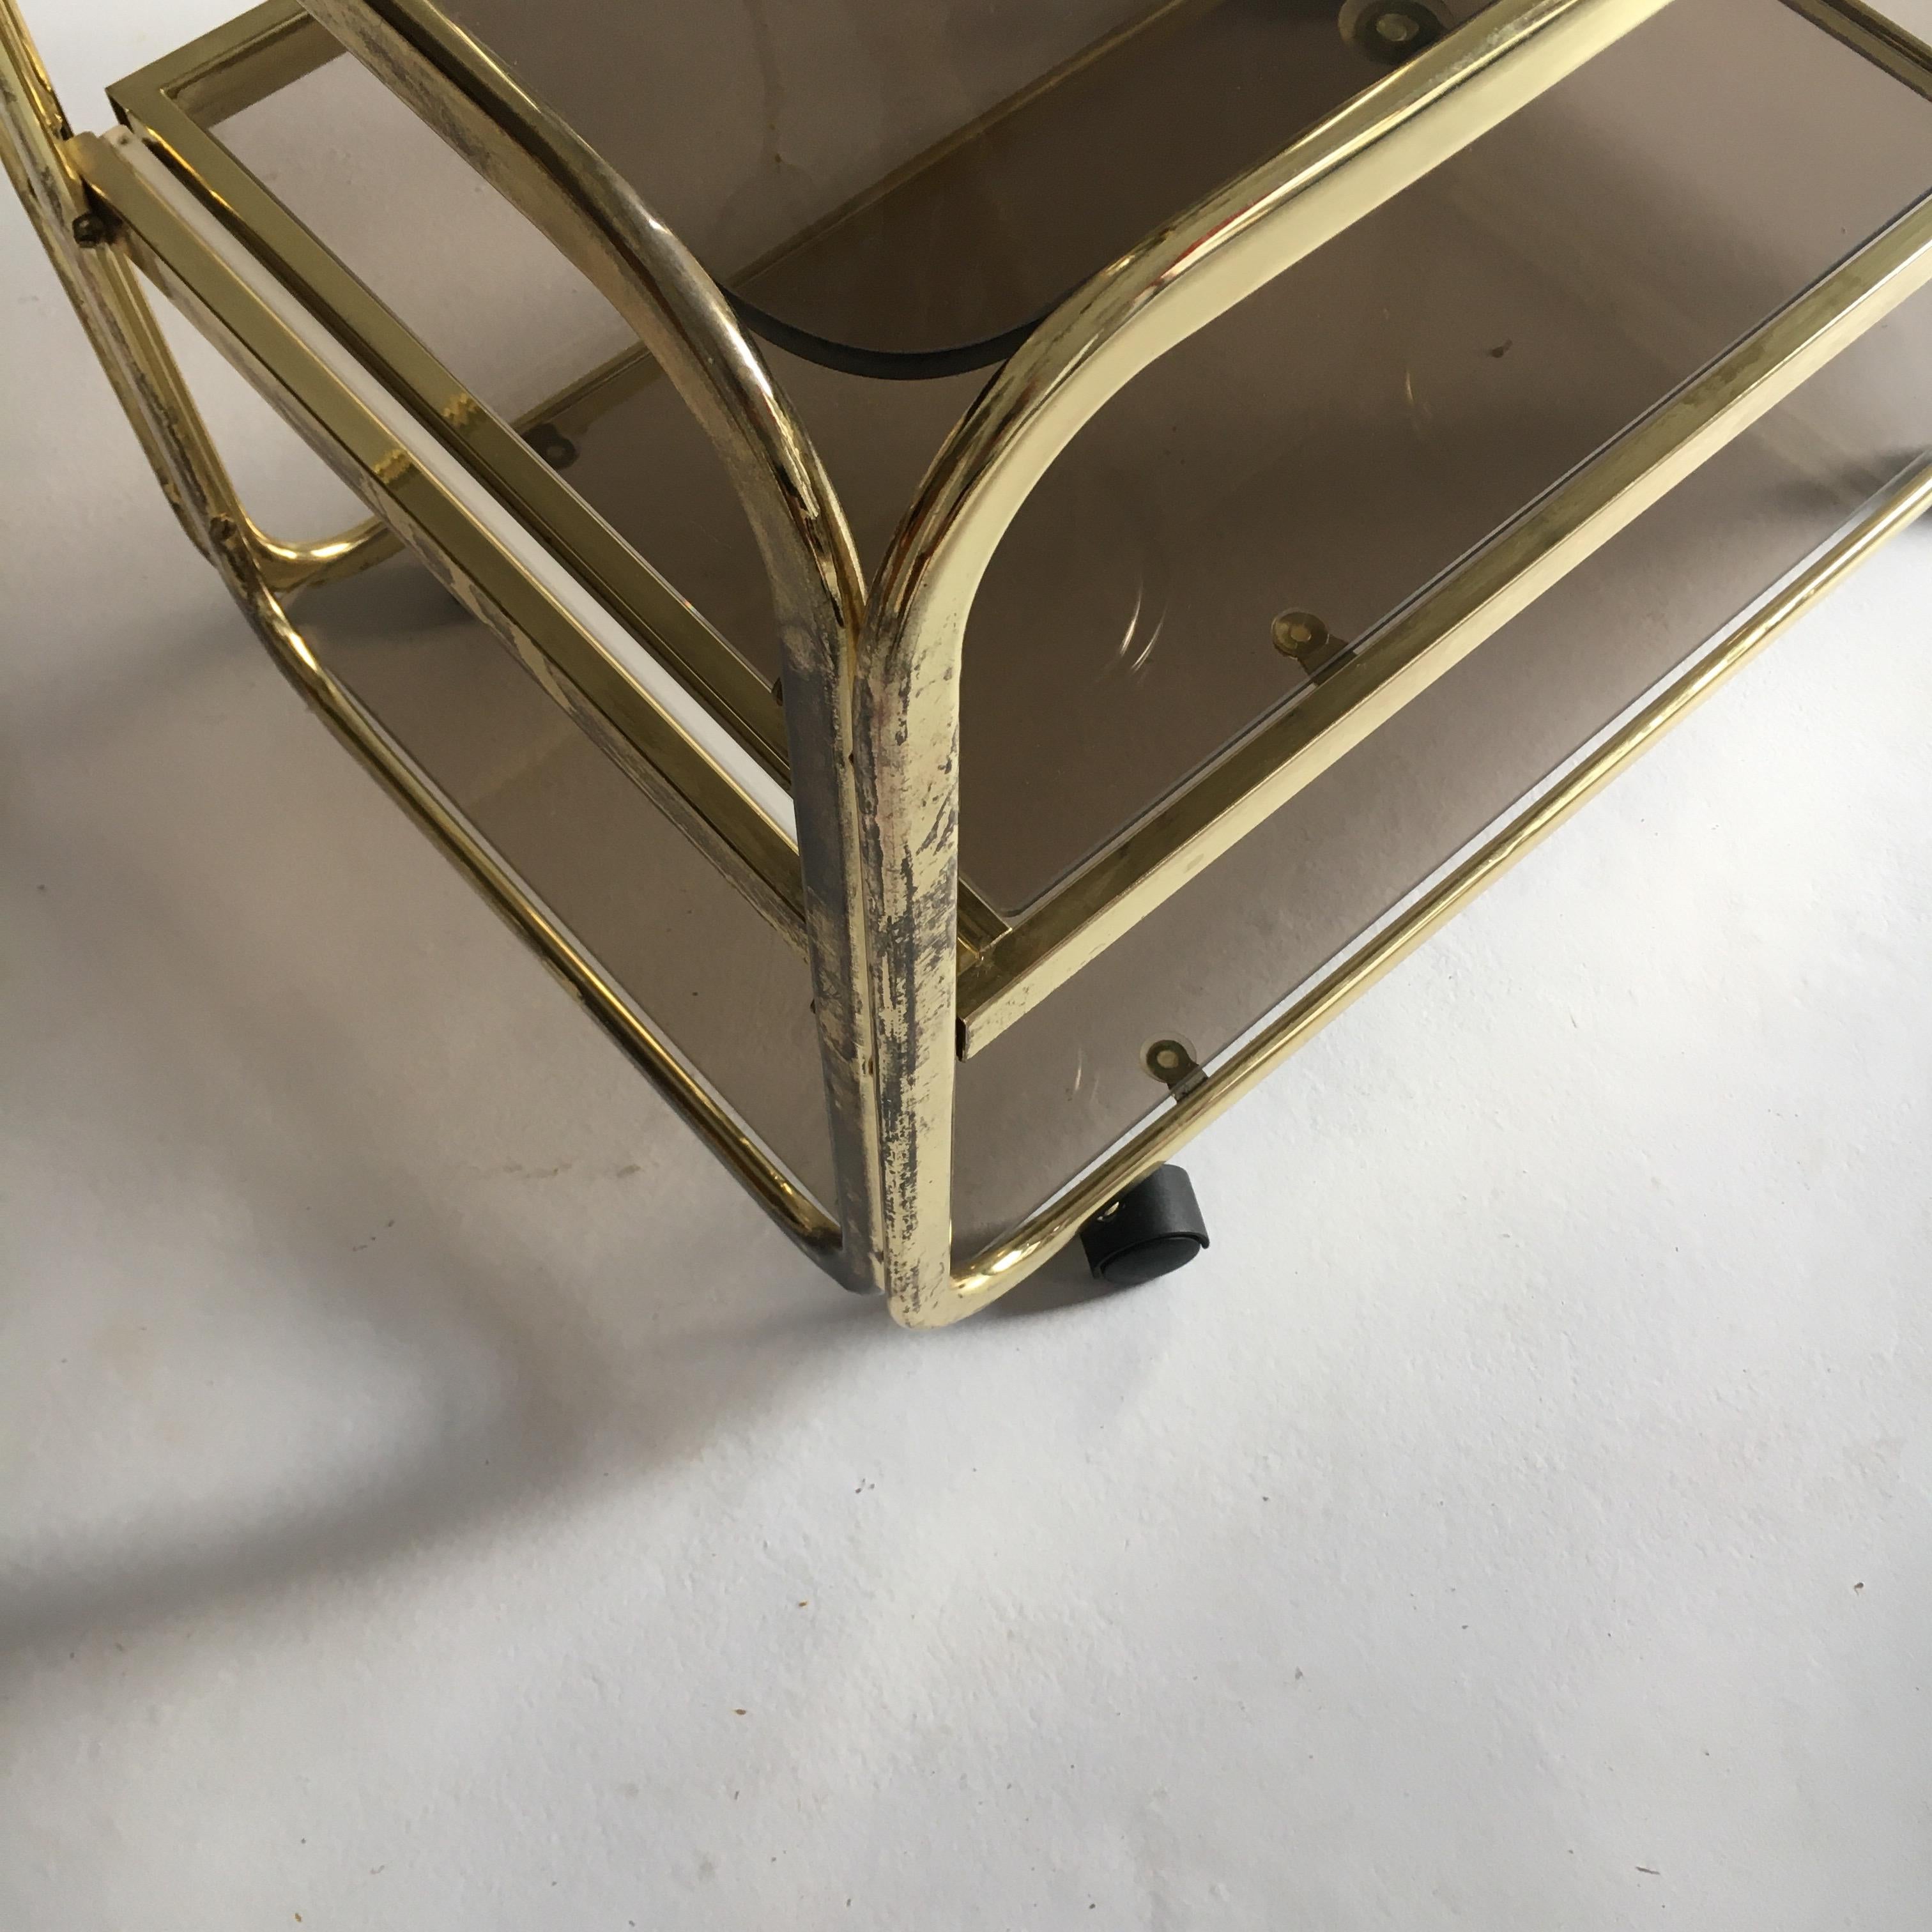 Vintage Brass Plated Bar Cart Table Brown Smoked Glass Plates by Morex, 1970s For Sale 6